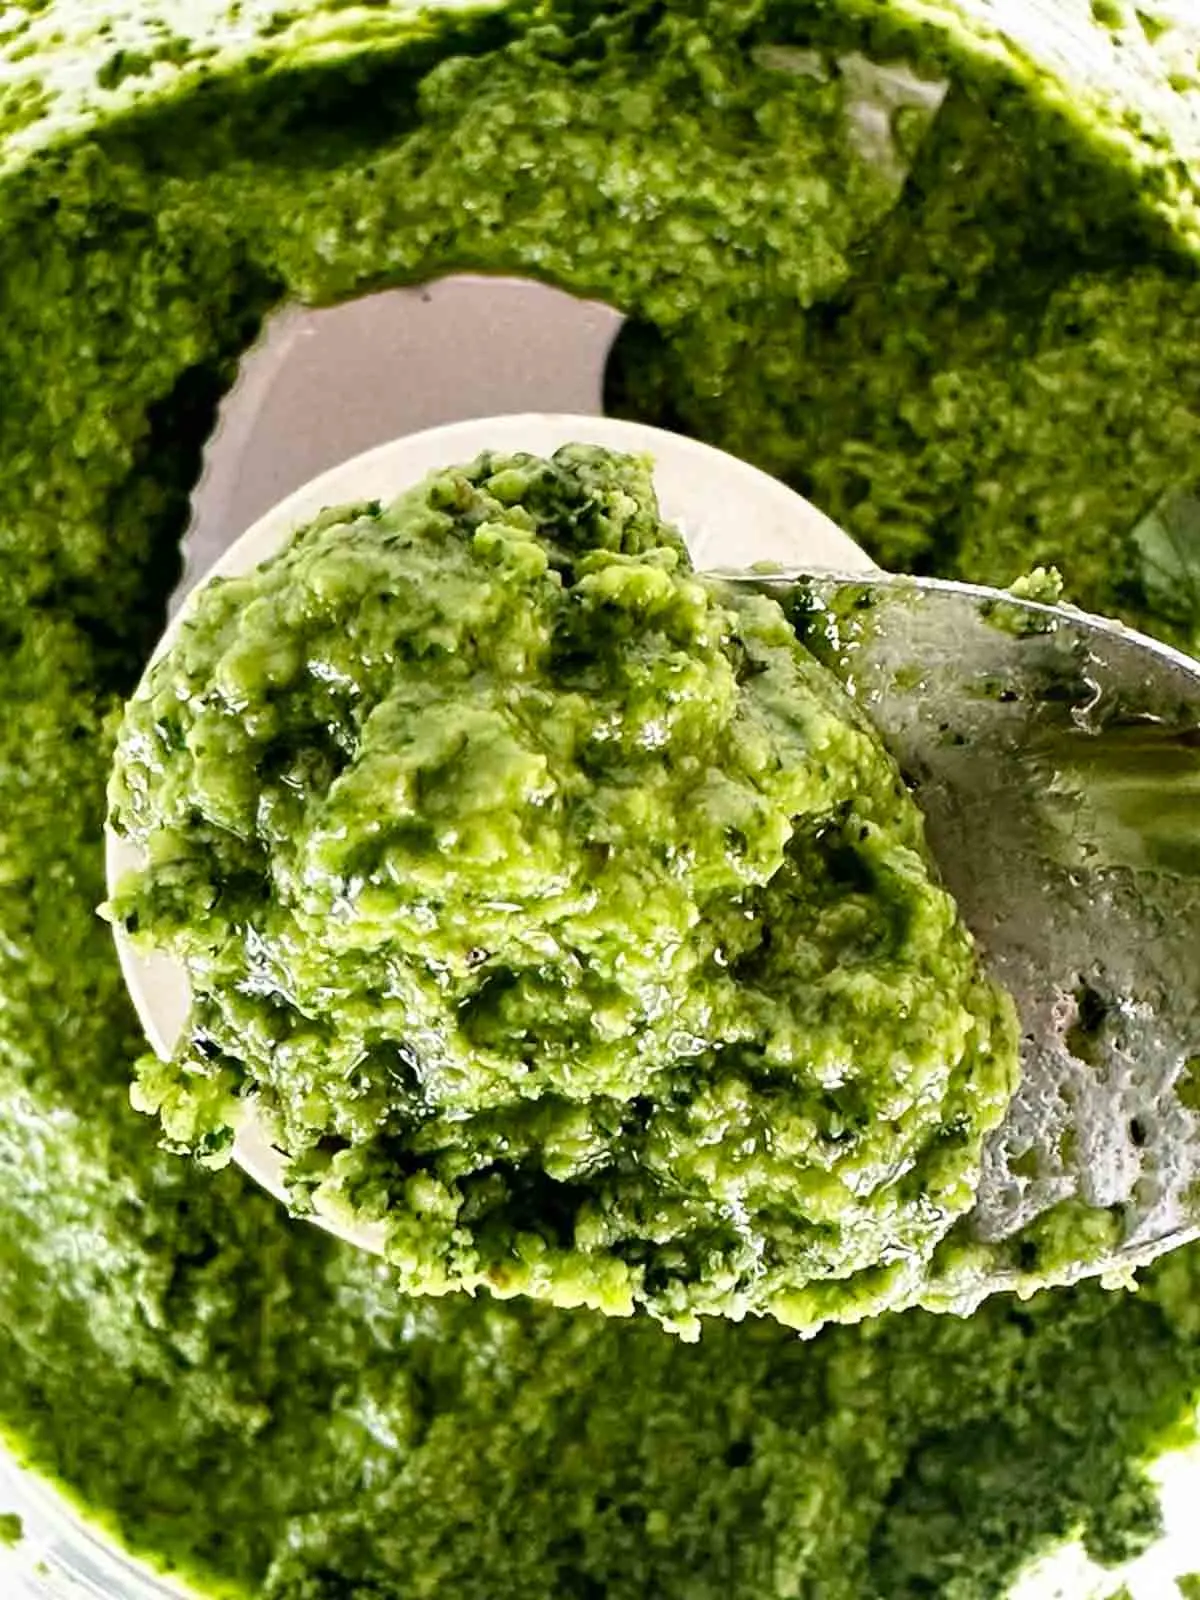 After pulsing about 3/4 cup of olive oil into your pesto with walnuts, check the consistency. If it is very thick like this, you need more olive oil.